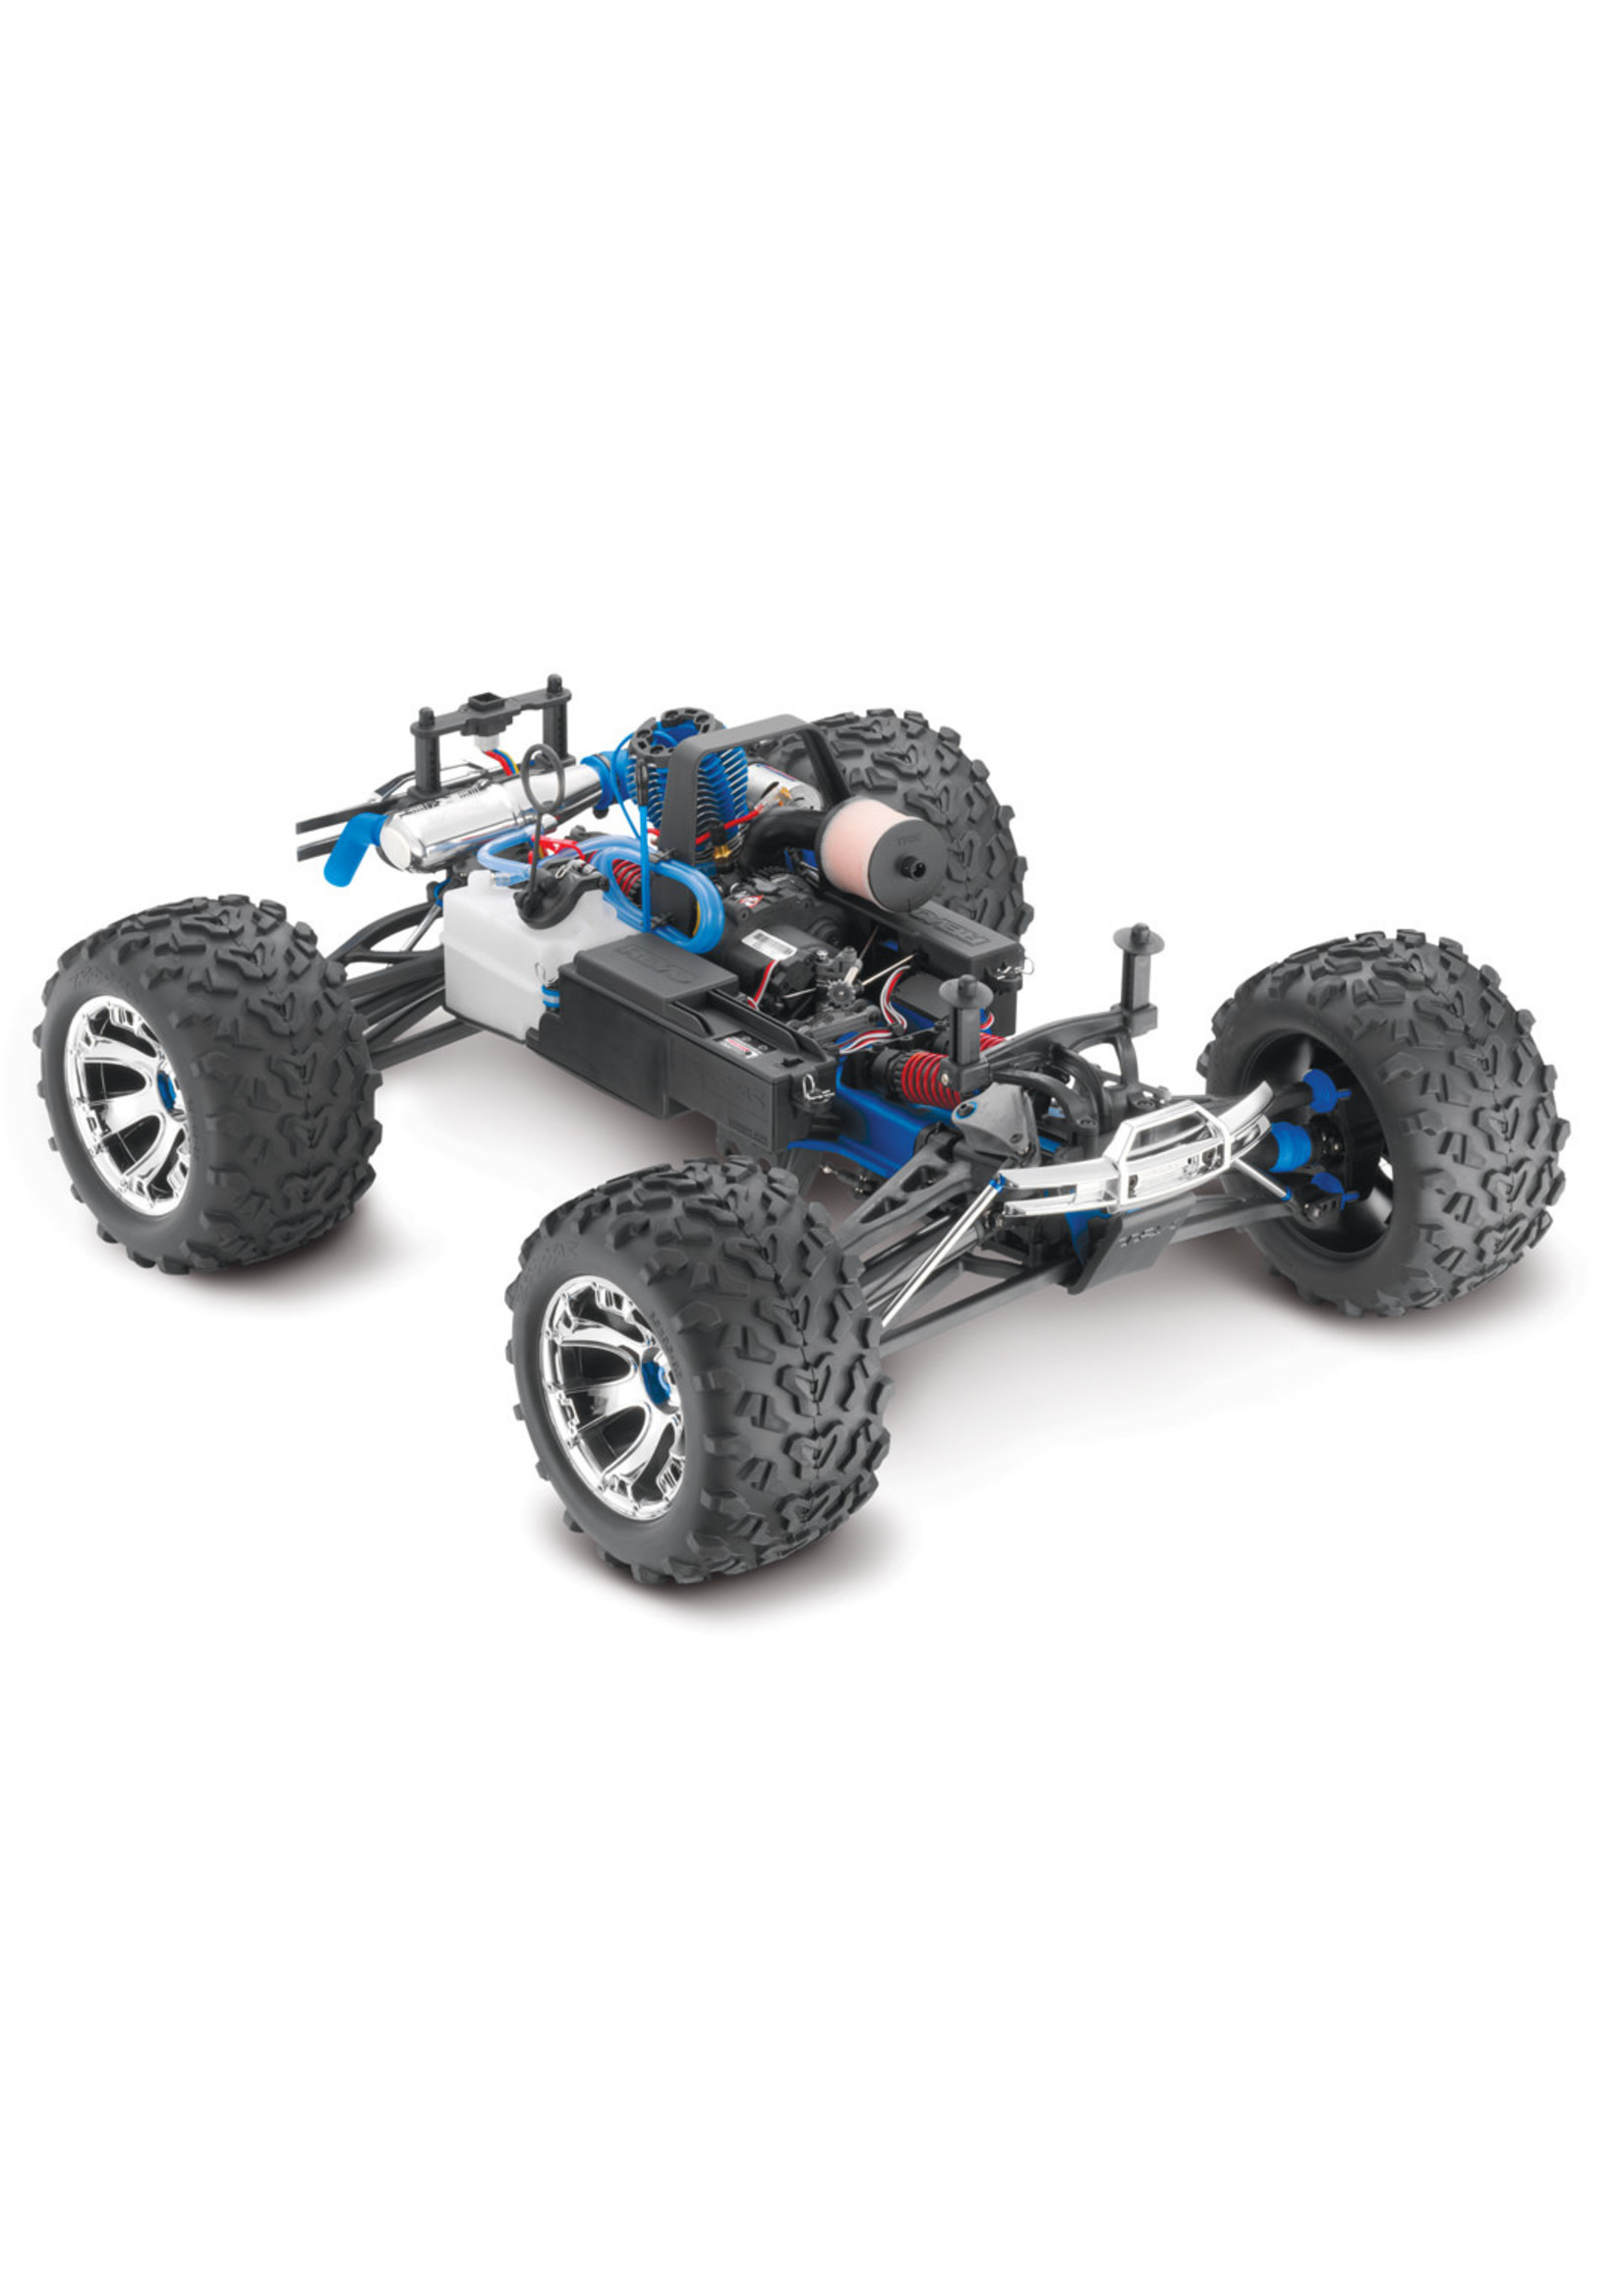 Traxxas TRA53097-3 Traxxas Revo 3.3: 1/10 Scale 4WD Nitro-Powered Monster Truck (with Telemetry Sensors) with TQi 2.4Ghz Radio System, Traxxas Link Wireless Module, And Traxxas Stability Management (TSM)